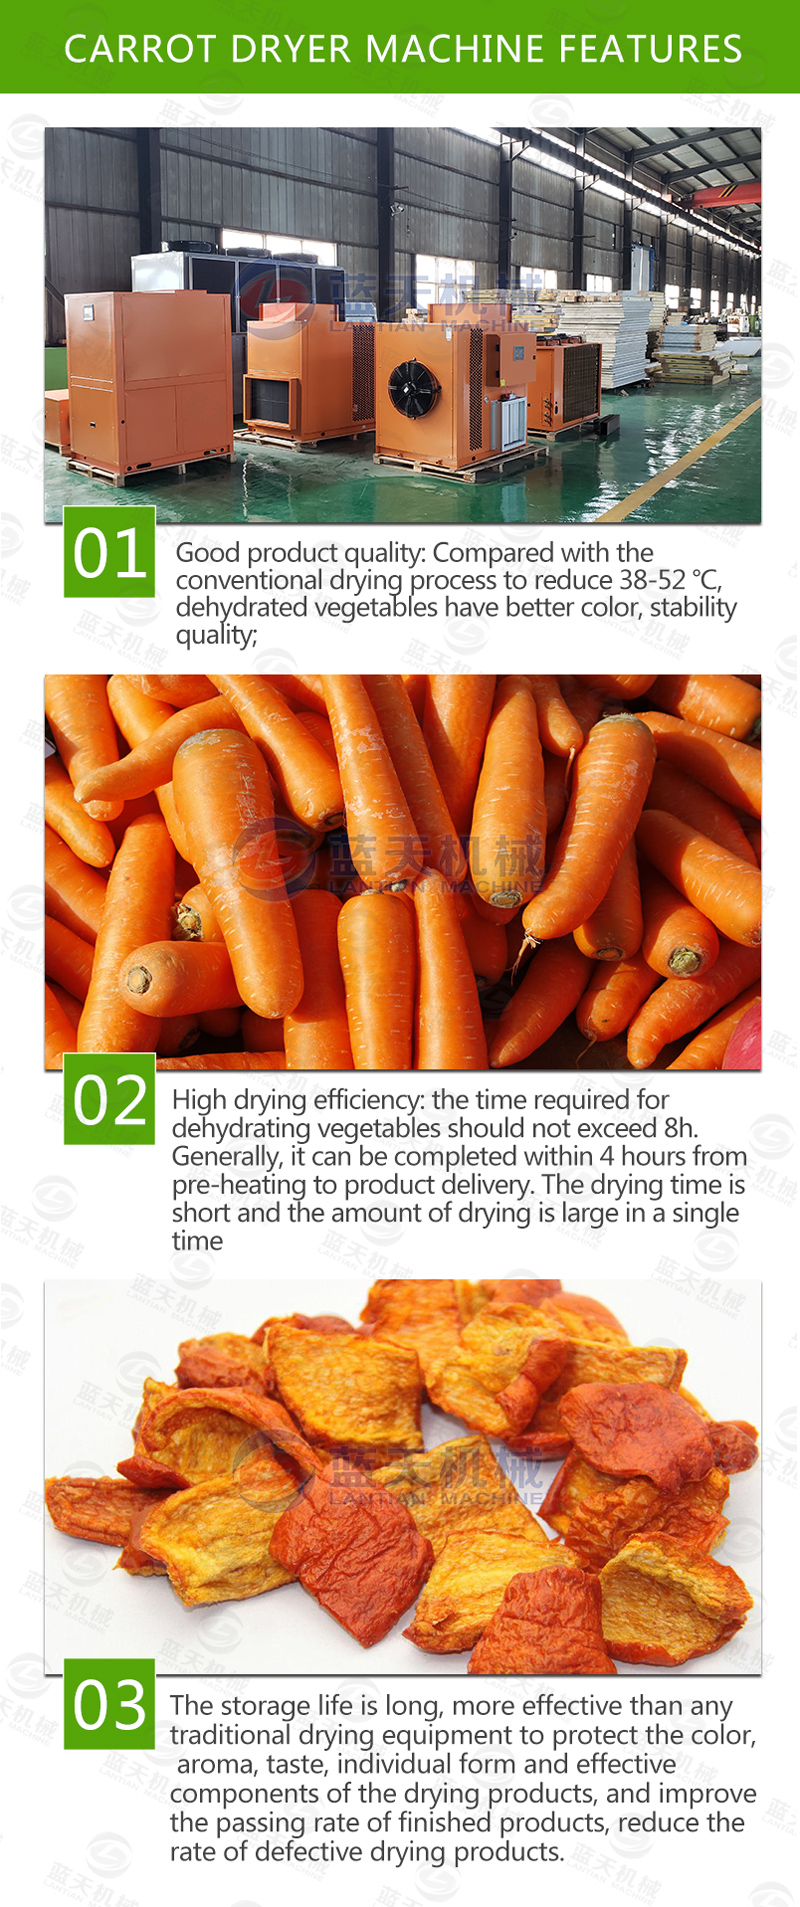 Carrot dryer machine have many advantages